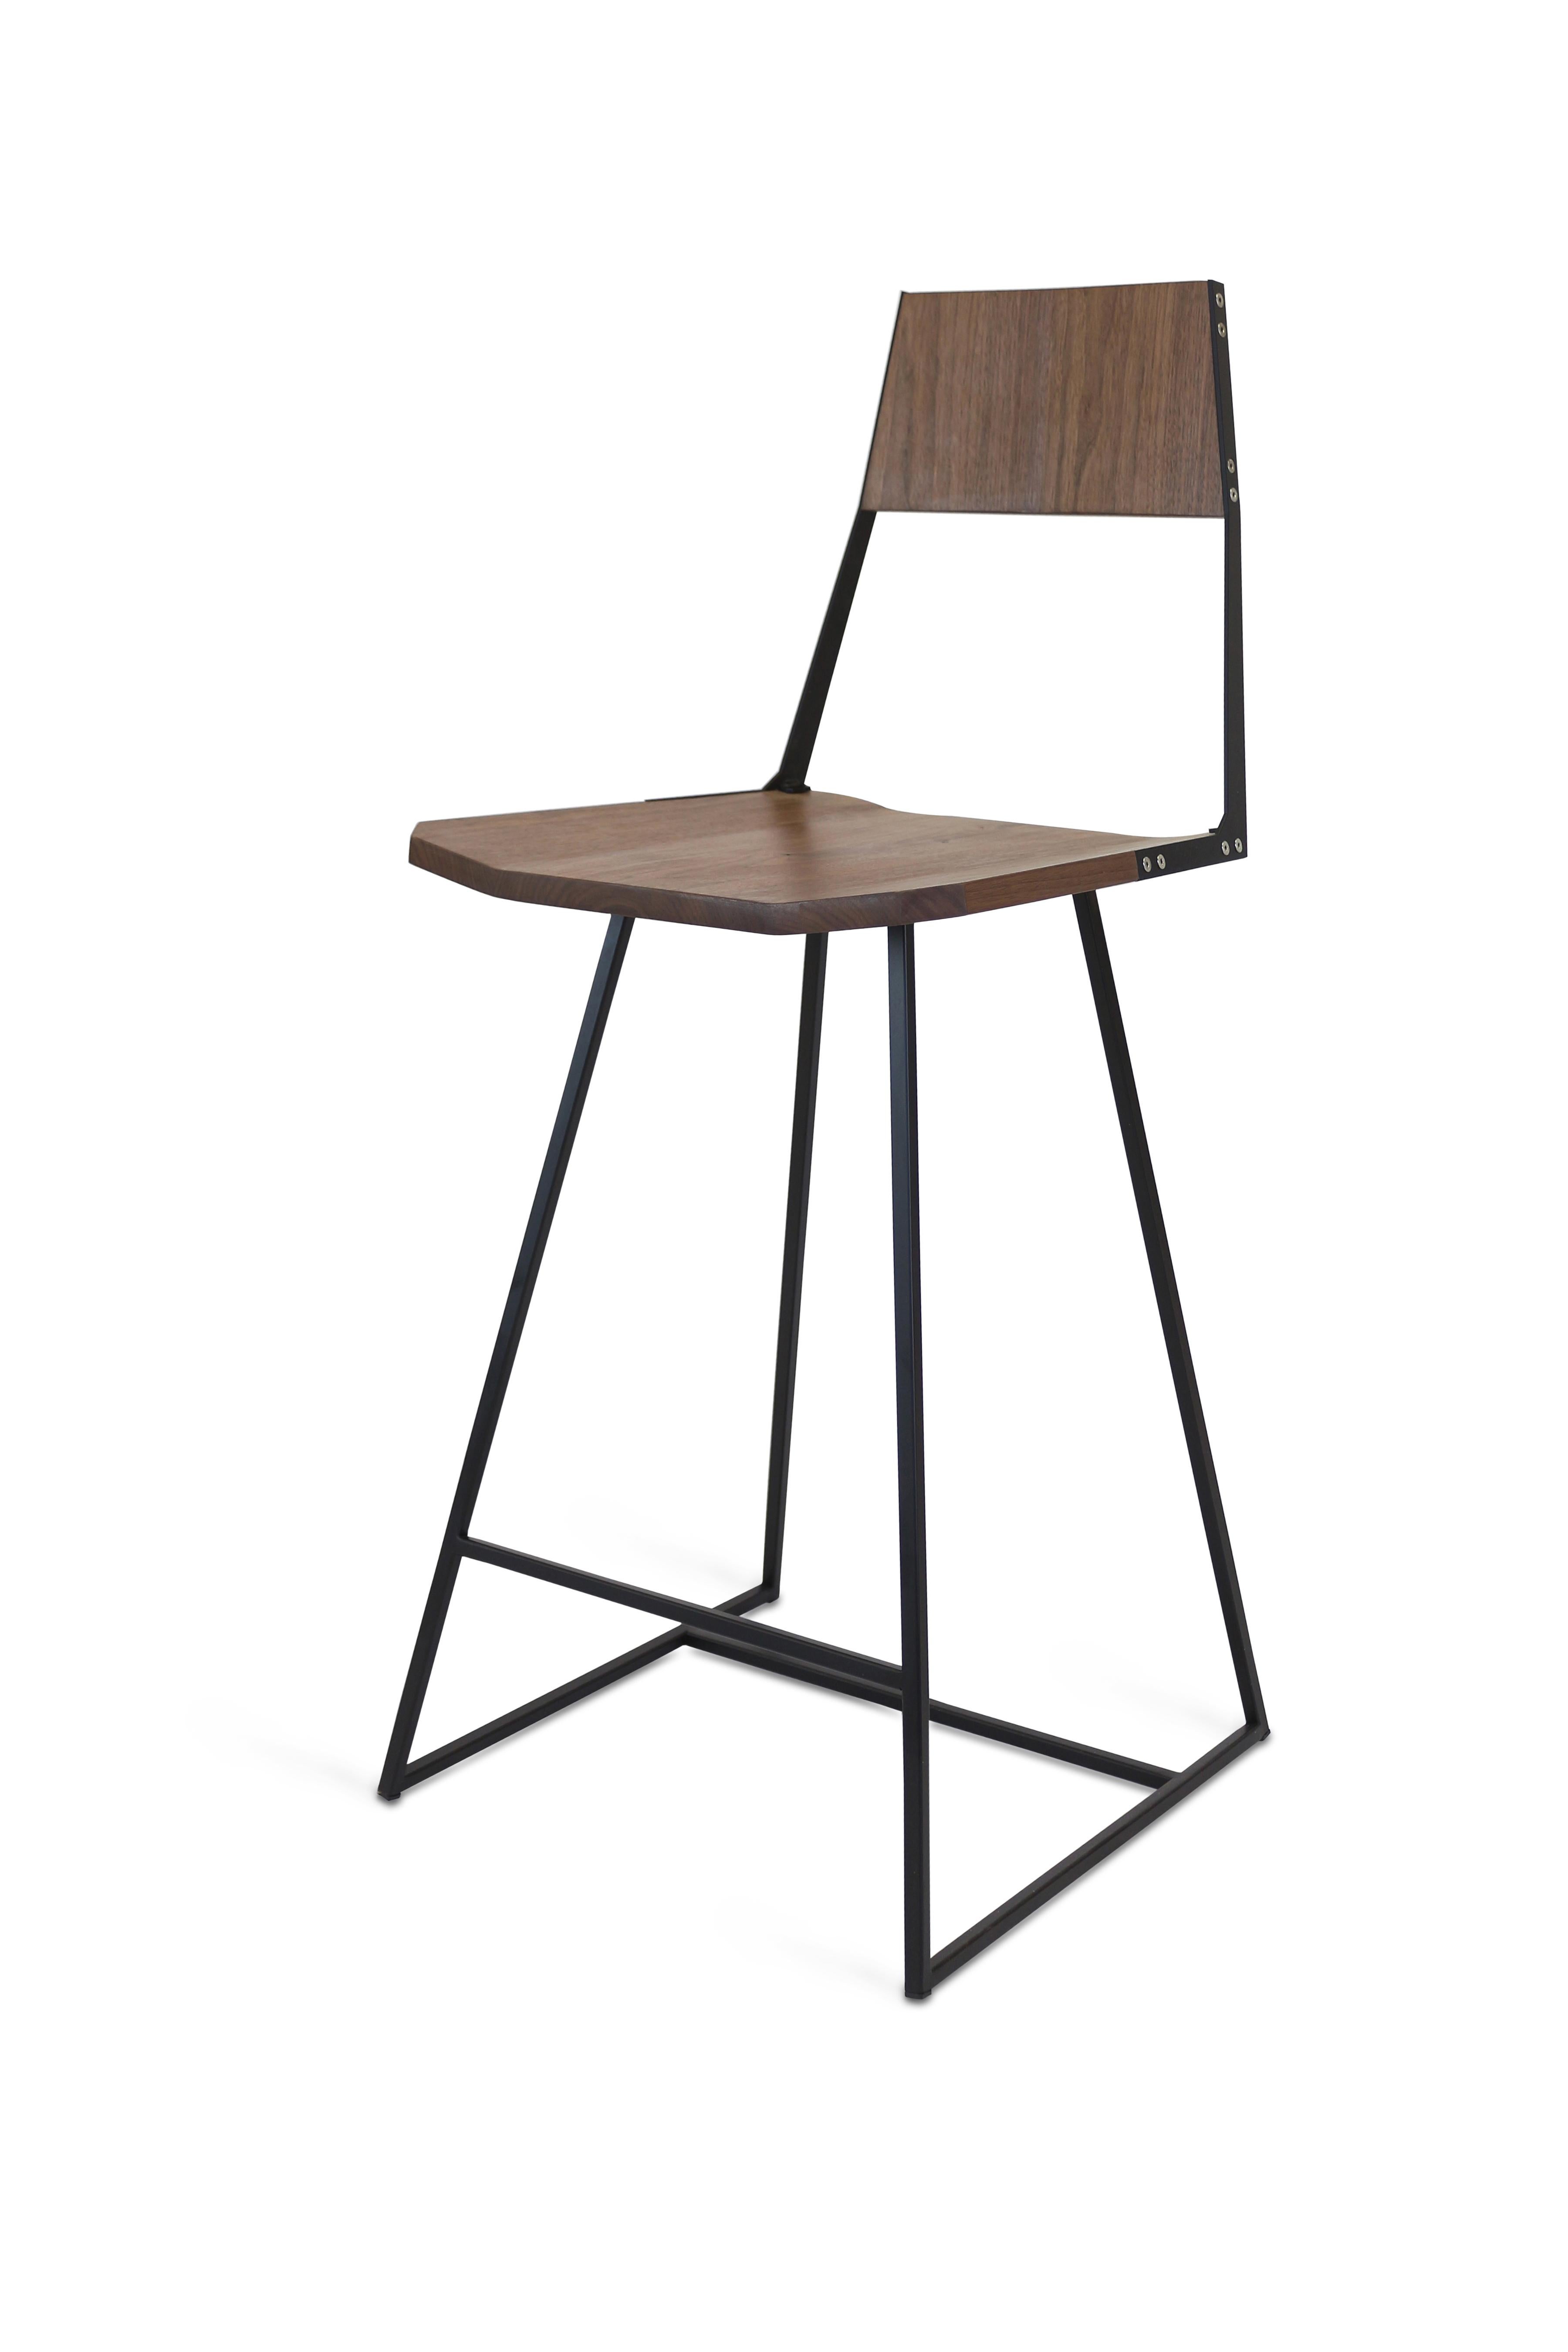 A perfect mix of Scandinavian inspiration and industrial flare that cohesively come together to make a statement piece which embodies simplicity, functionality and elegance.
 
The Clarkester is constructed of solid wood (American Walnut or Maple)